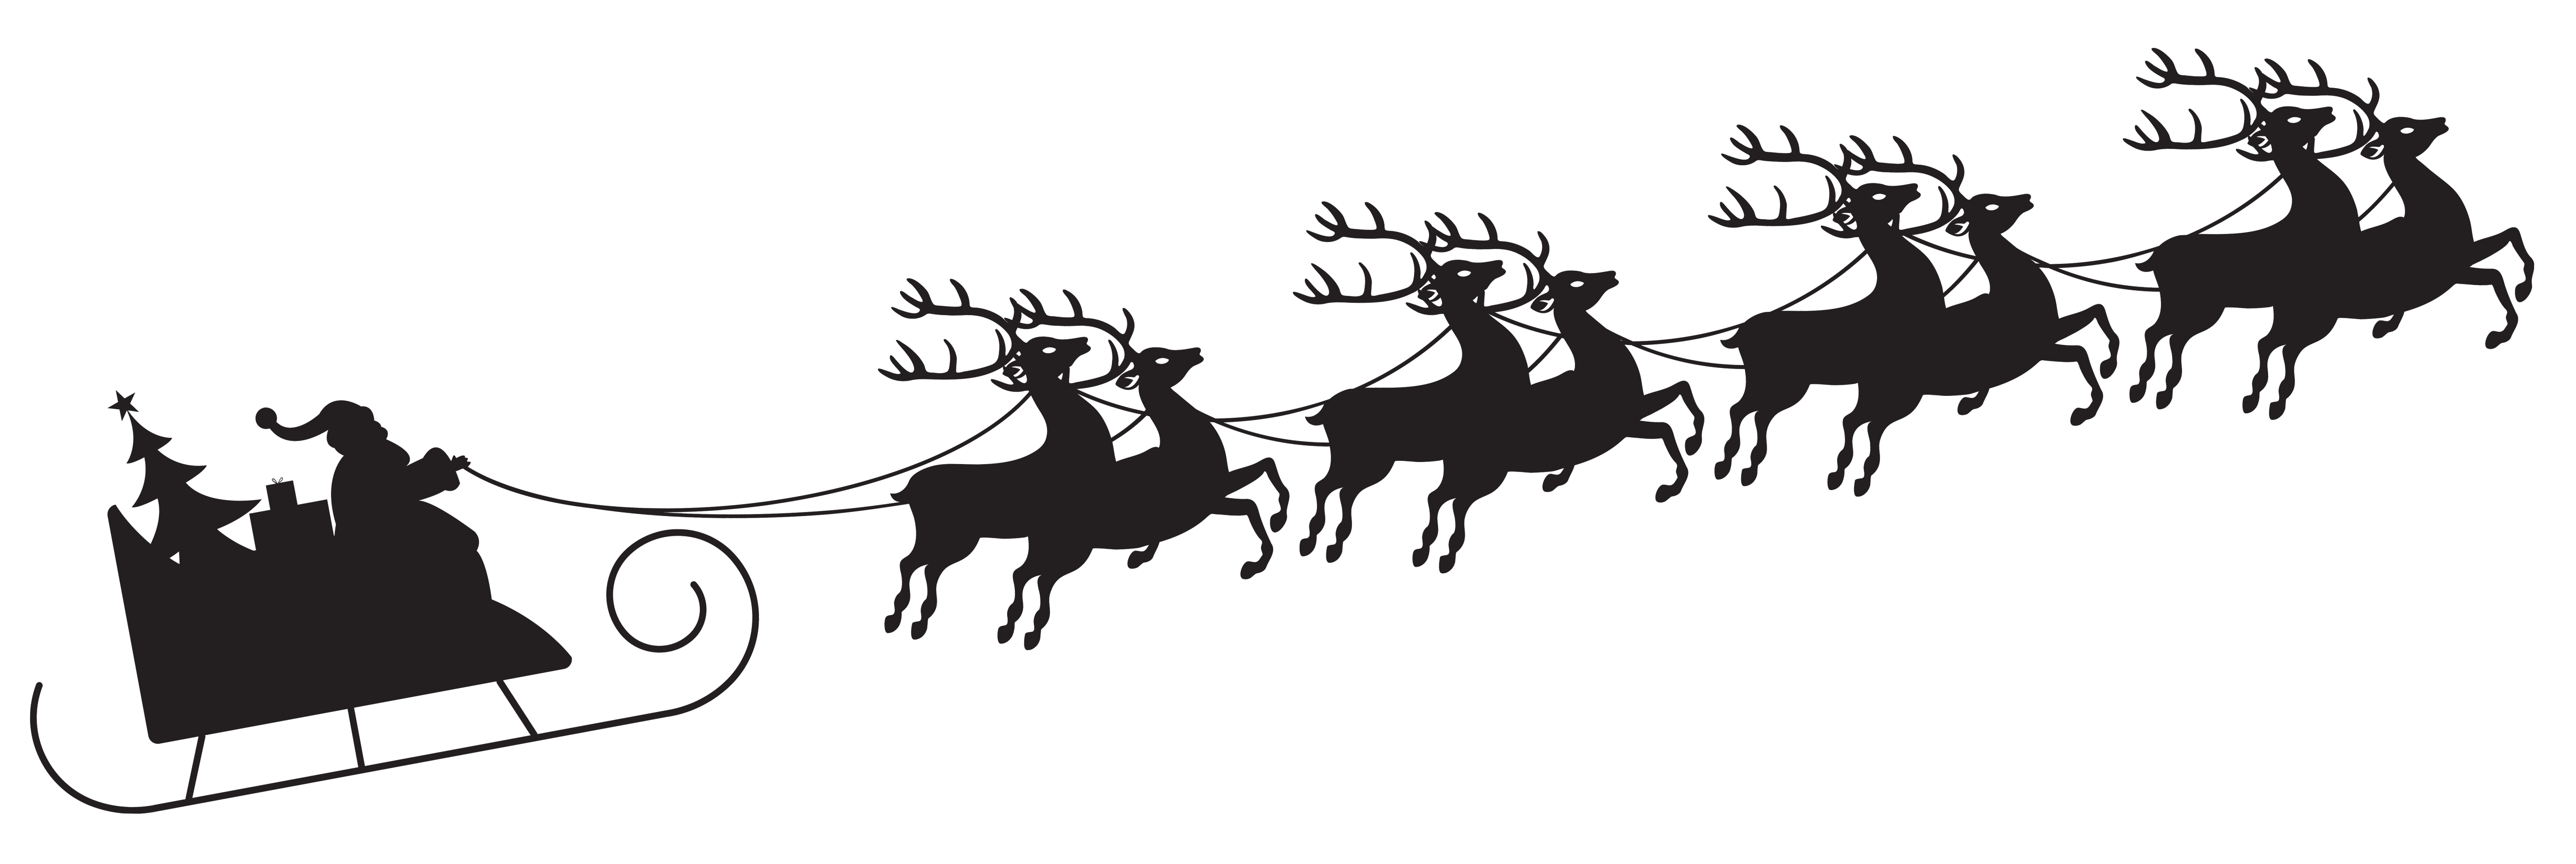 Silhouette Claus Sled Reindeer Santa Sleigh With Clipart